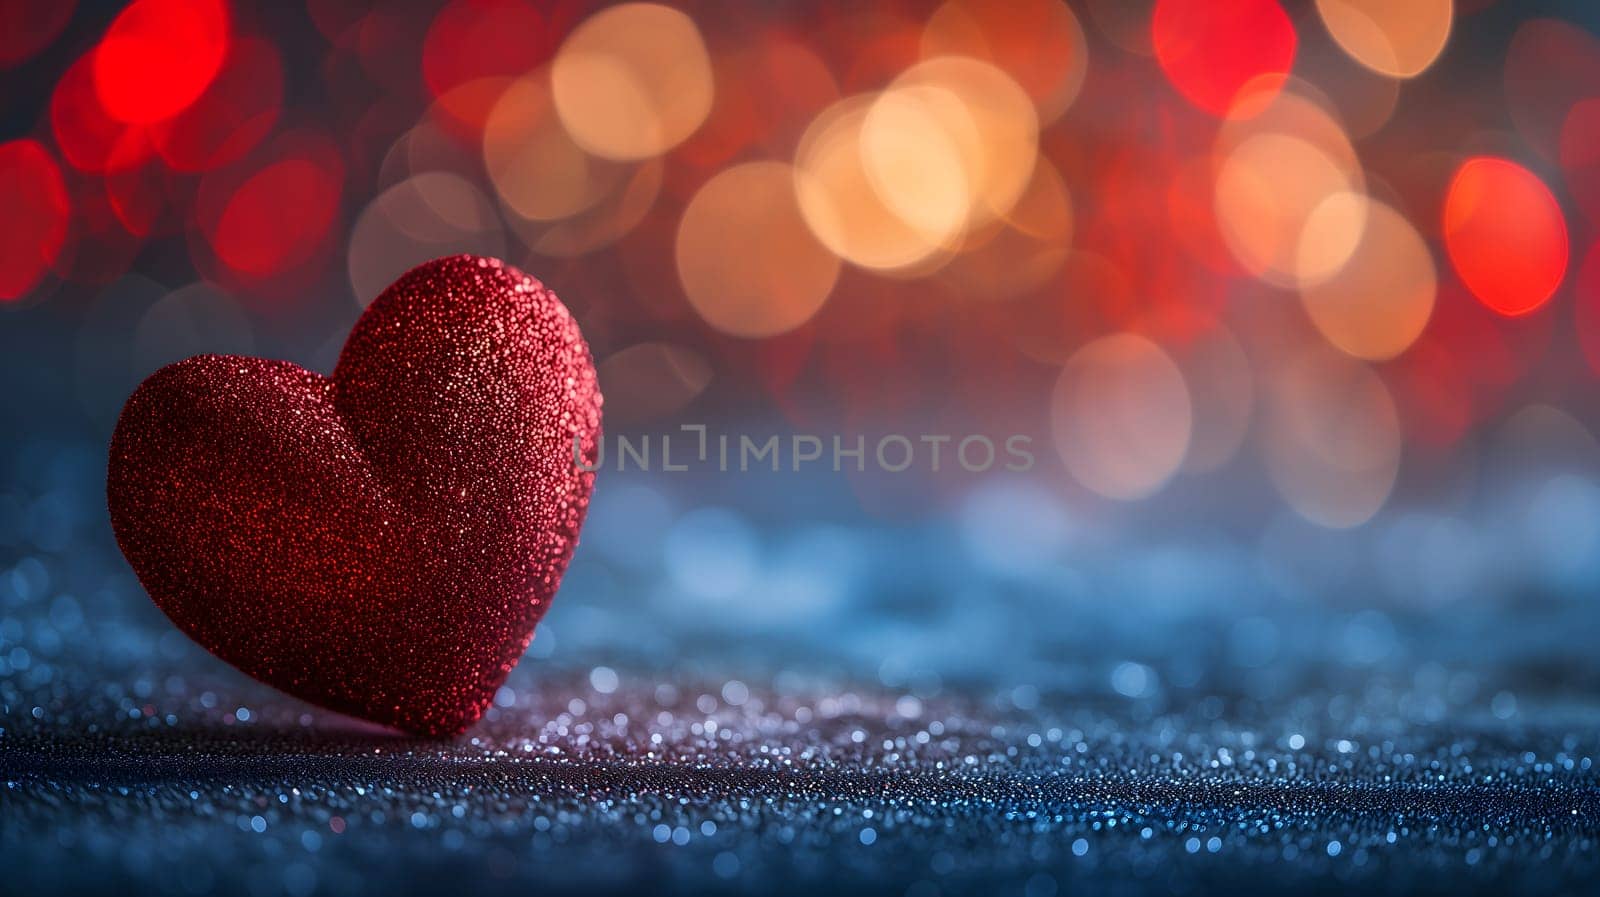 Red heart on table with selective focus and bokeh background for valentine day greeting card. by z1b